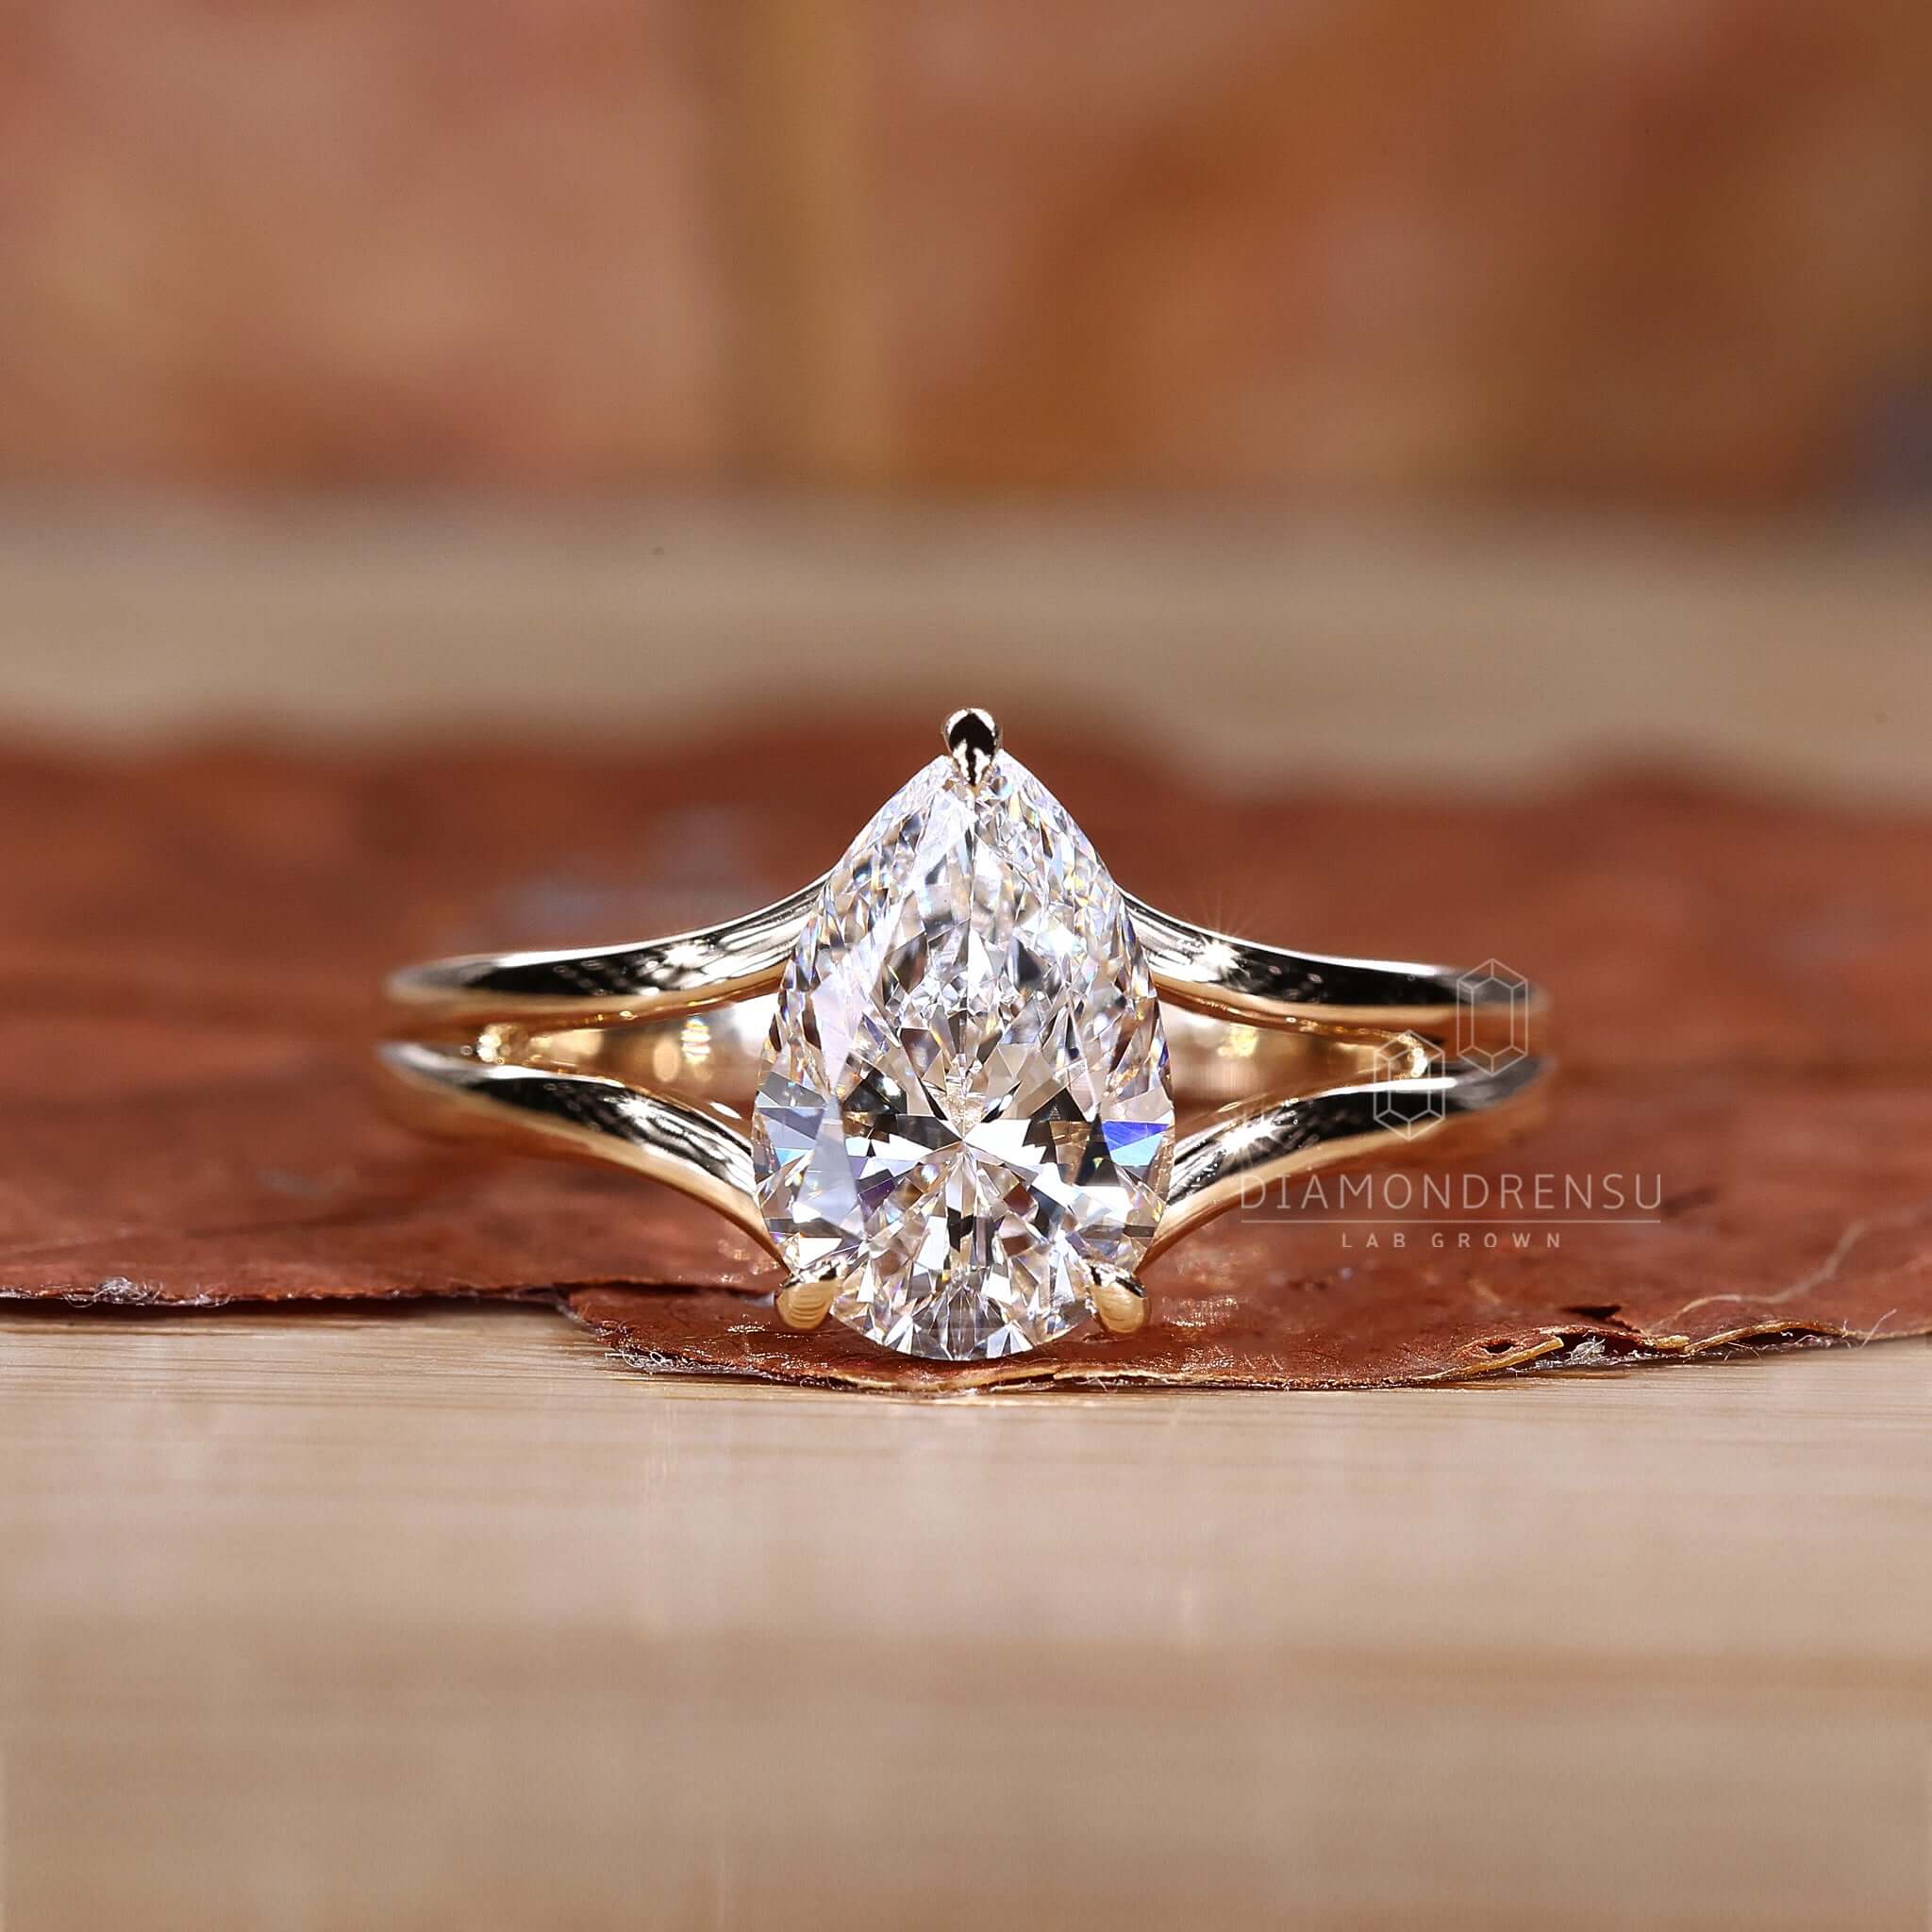 A Pear Halo Engagement Ring adorning a hand for a romantic look.